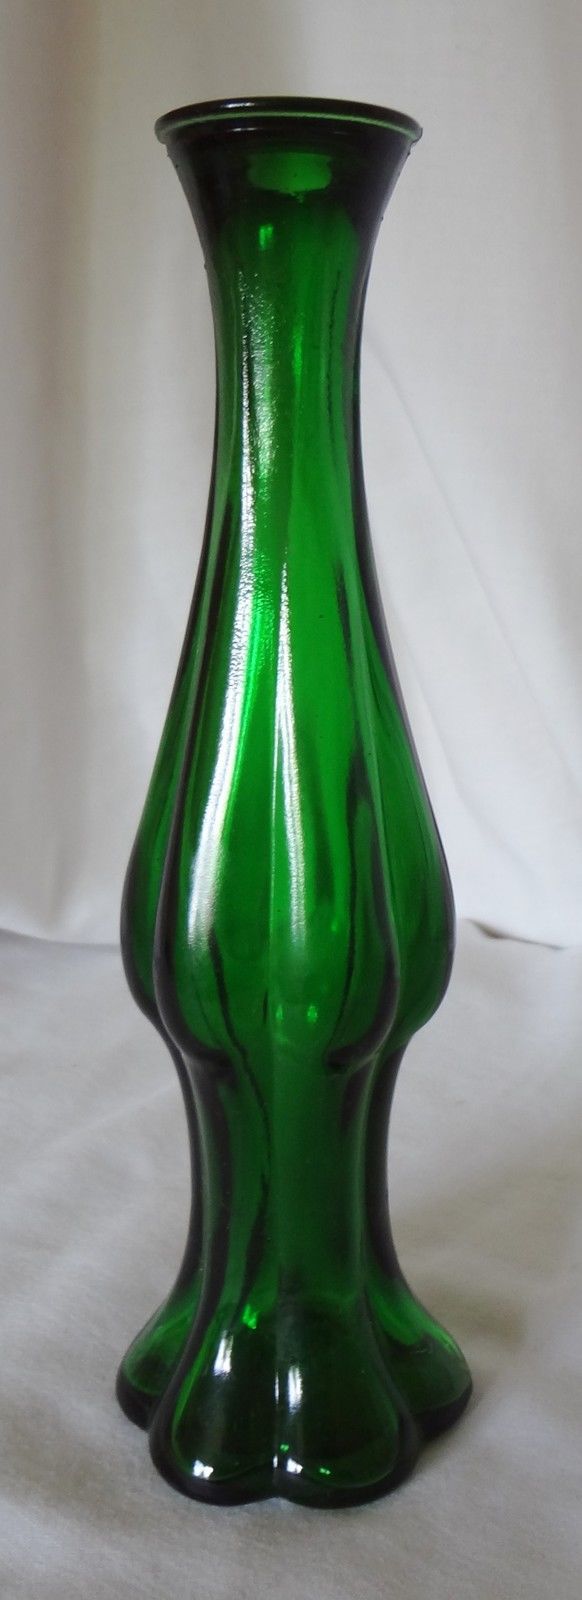 Emerald Forest Green Glass Ribbed Bud Vase 8 Inches Tall - $6.99